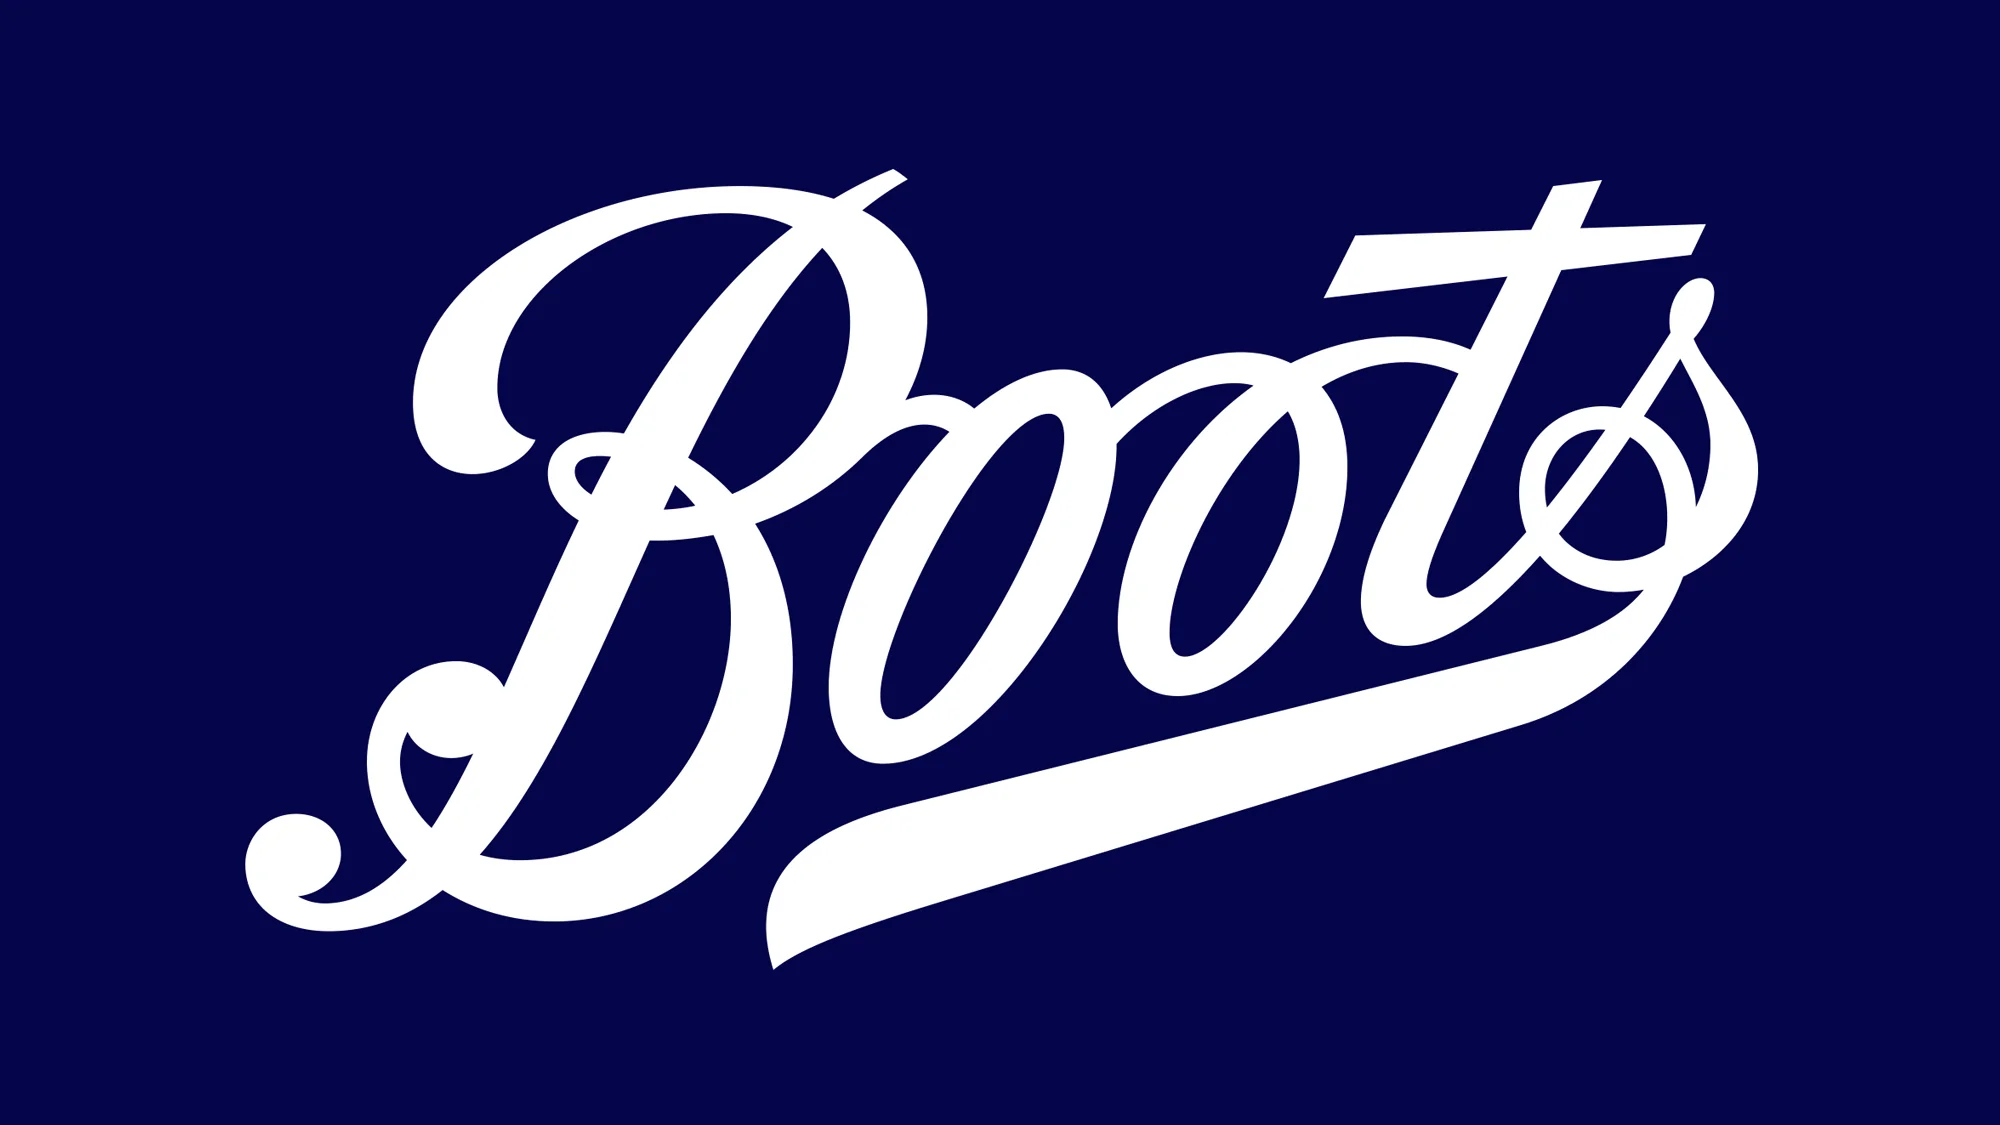 Boots logo, white text on a blue background